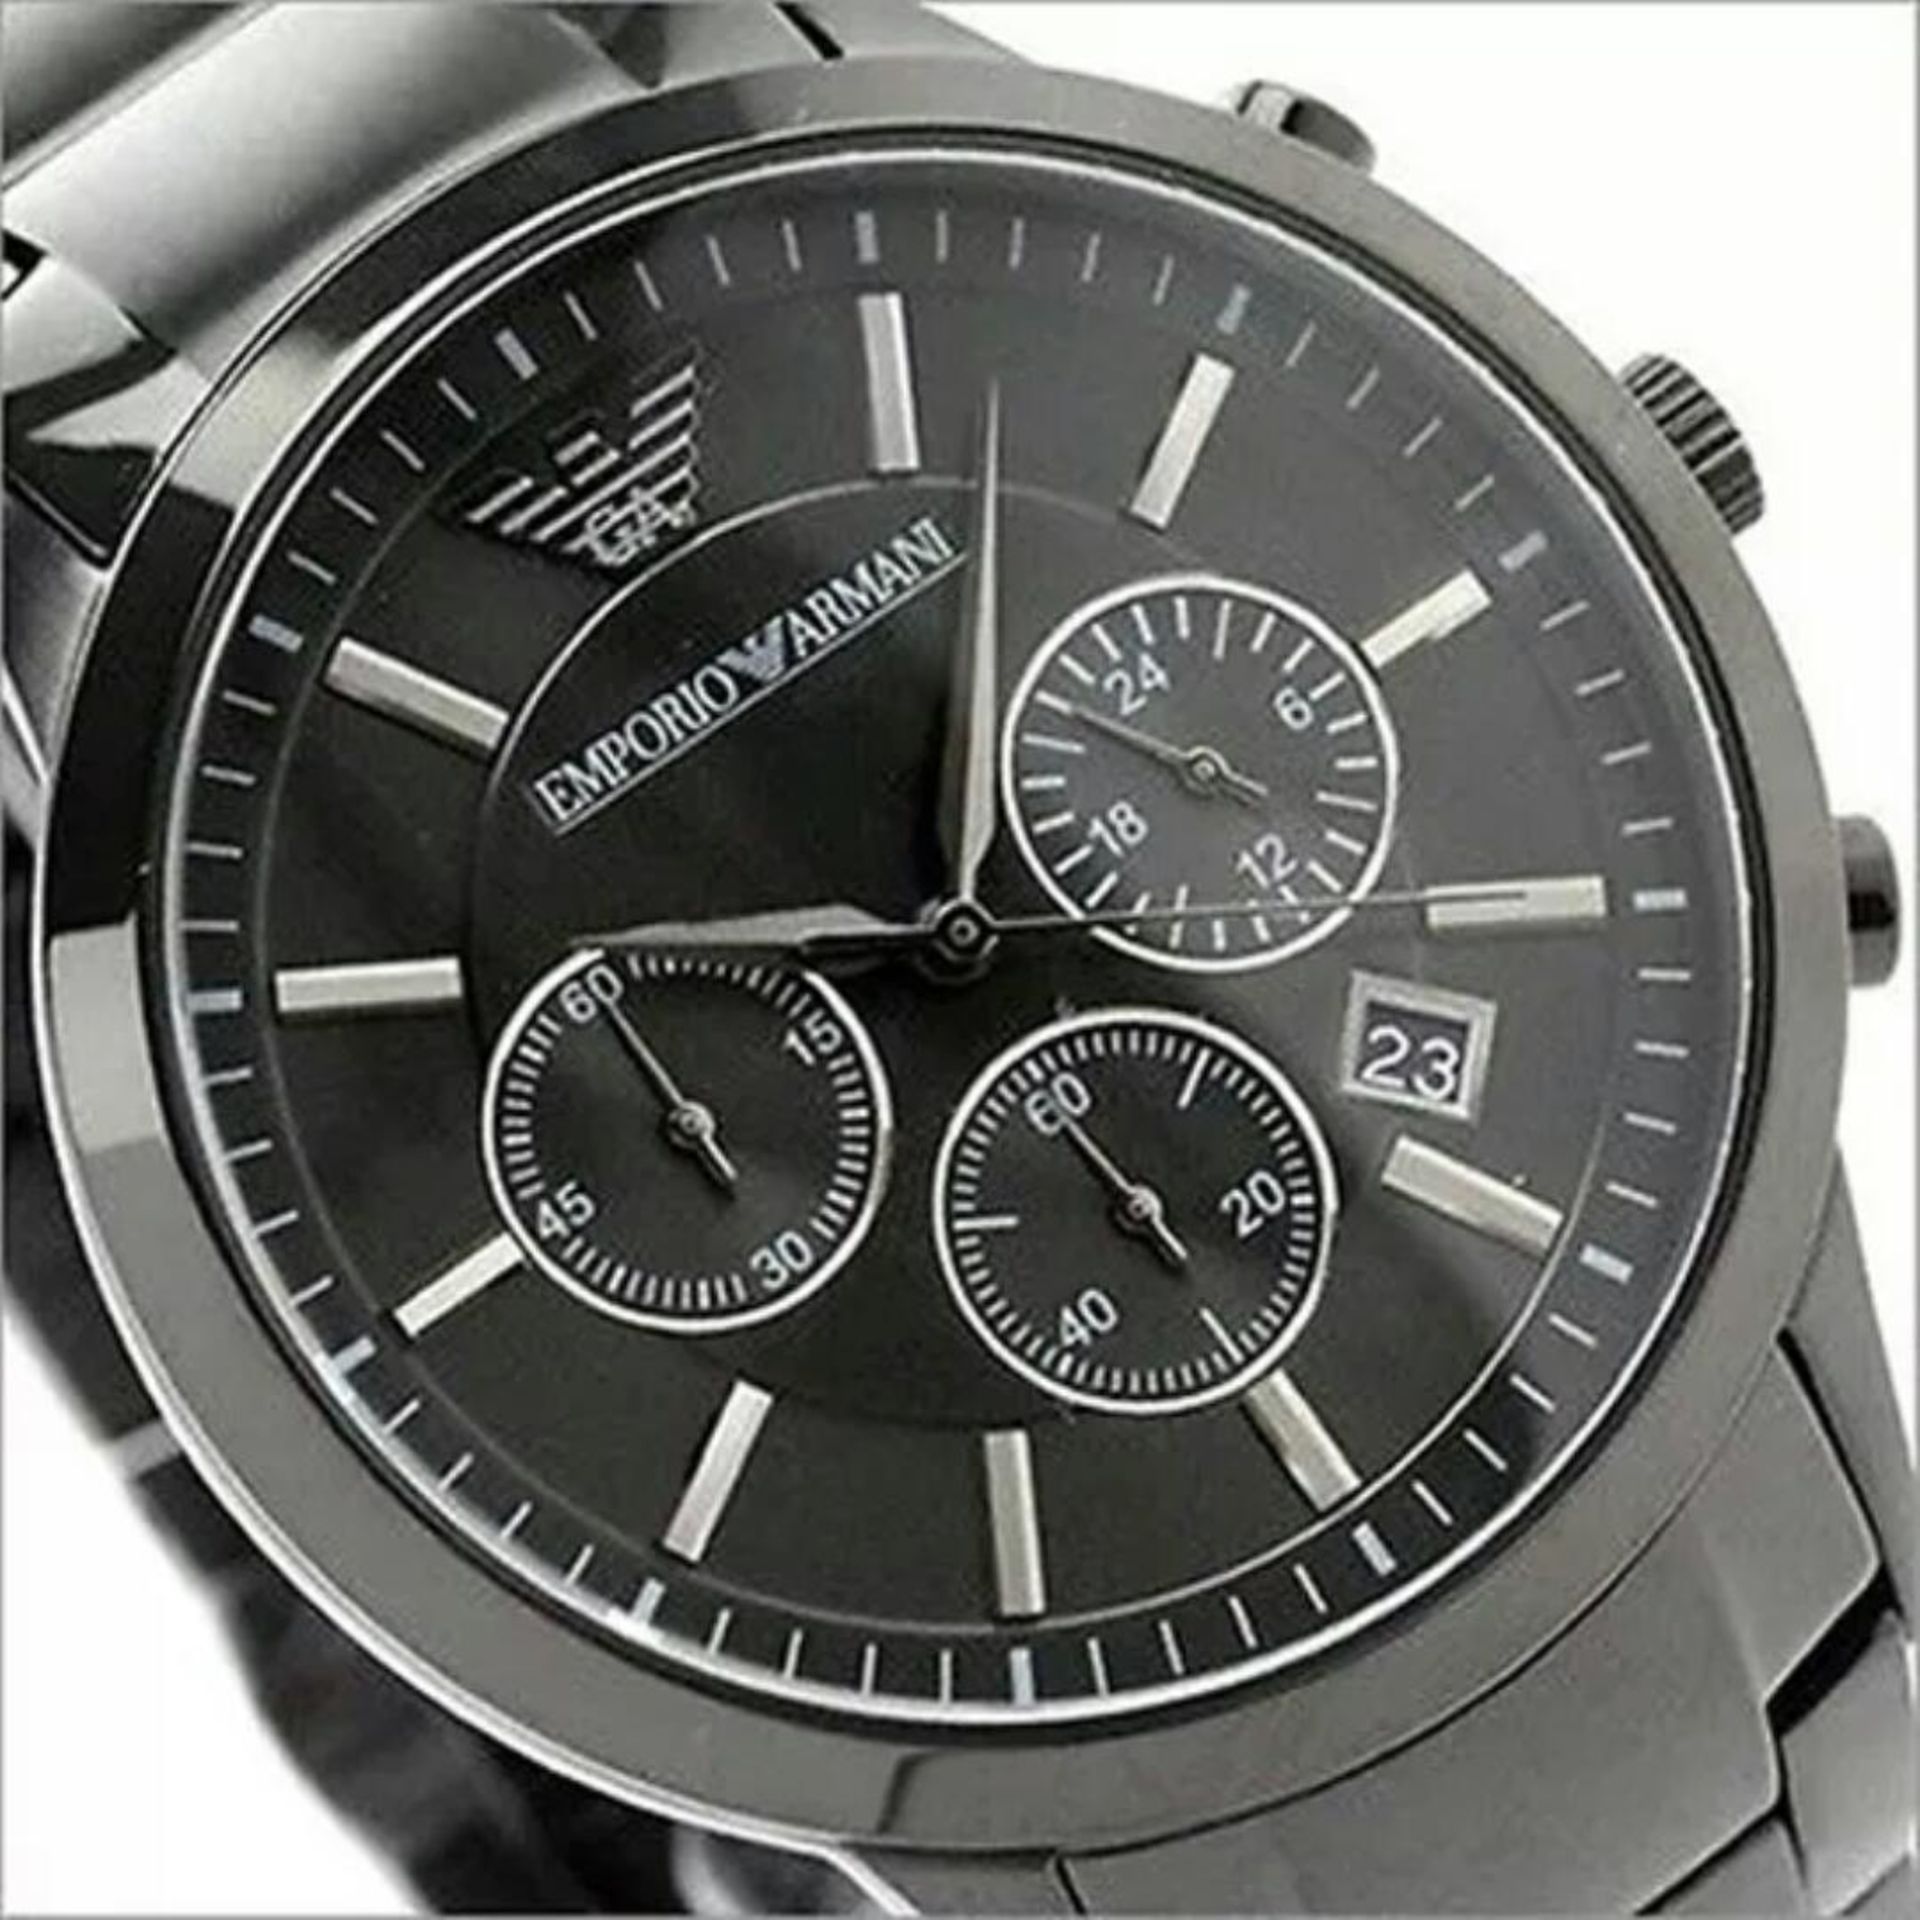 10 X BRAND NEW EMPORIO ARMANI DESIGNER WATCHES, COMPLETE WITH ORIGINAL ARMANI WATCH BOXES, MANUALS - Image 6 of 11